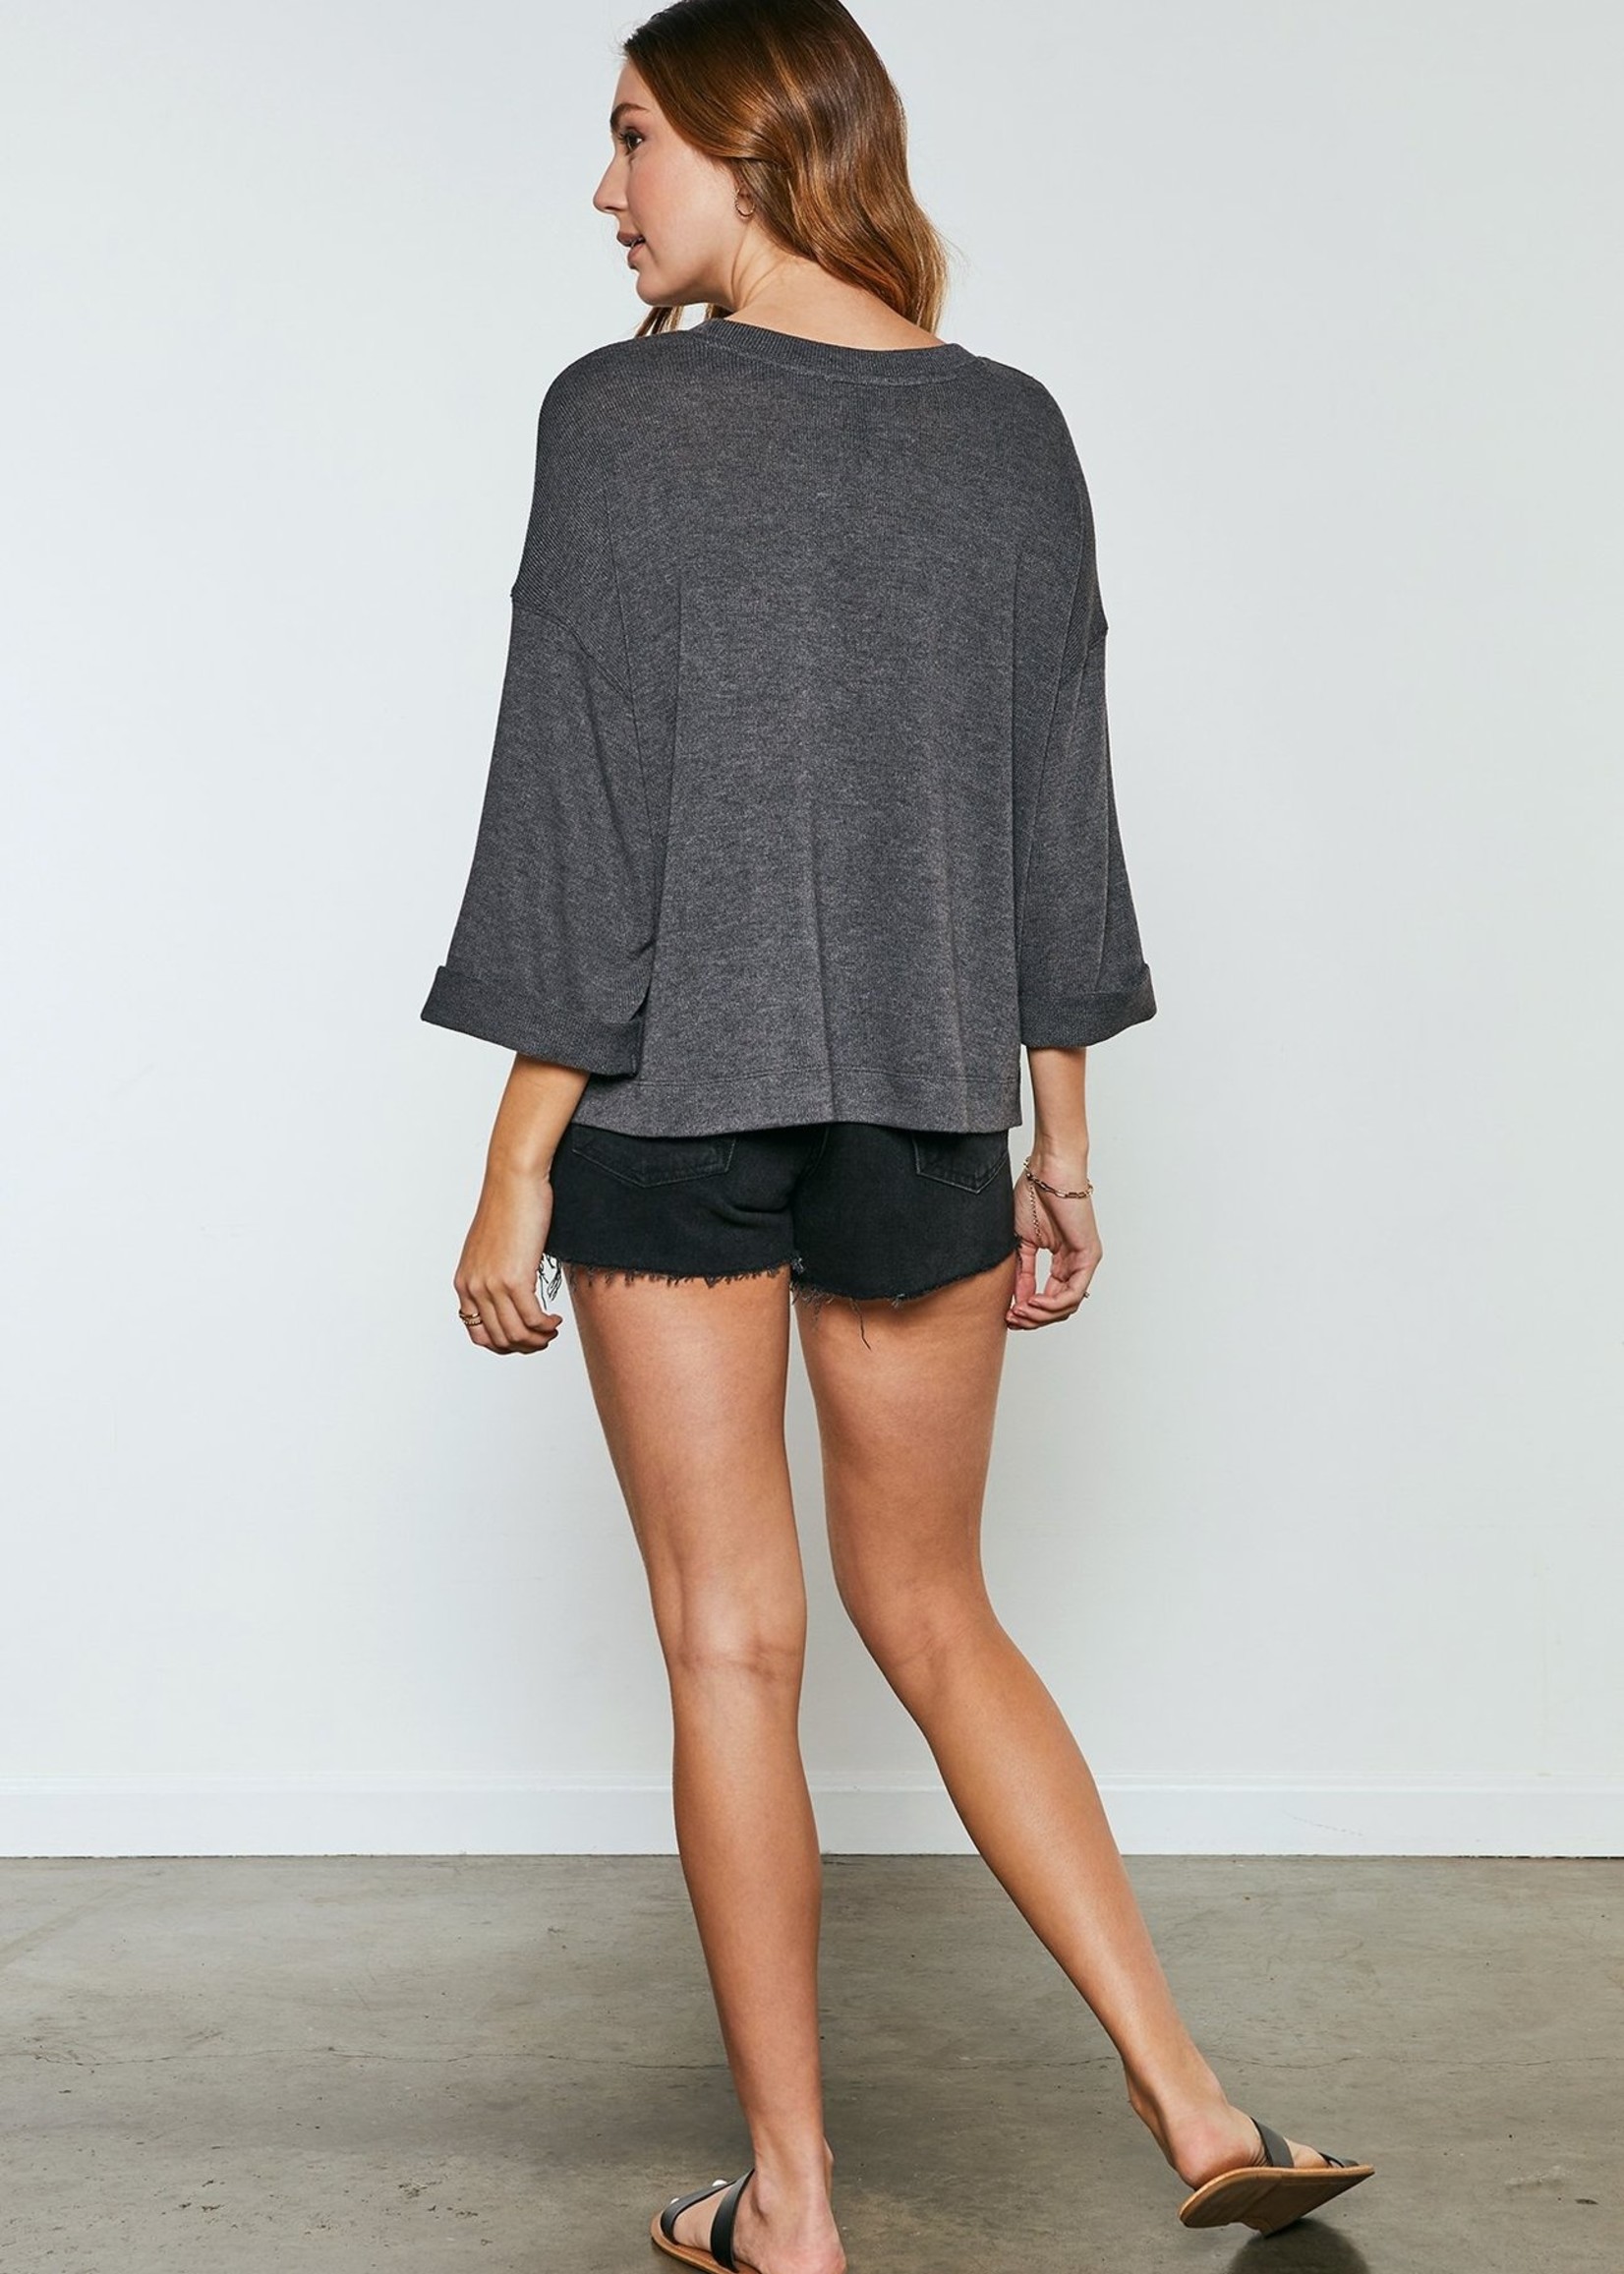 Gentle Fawn Atley Top